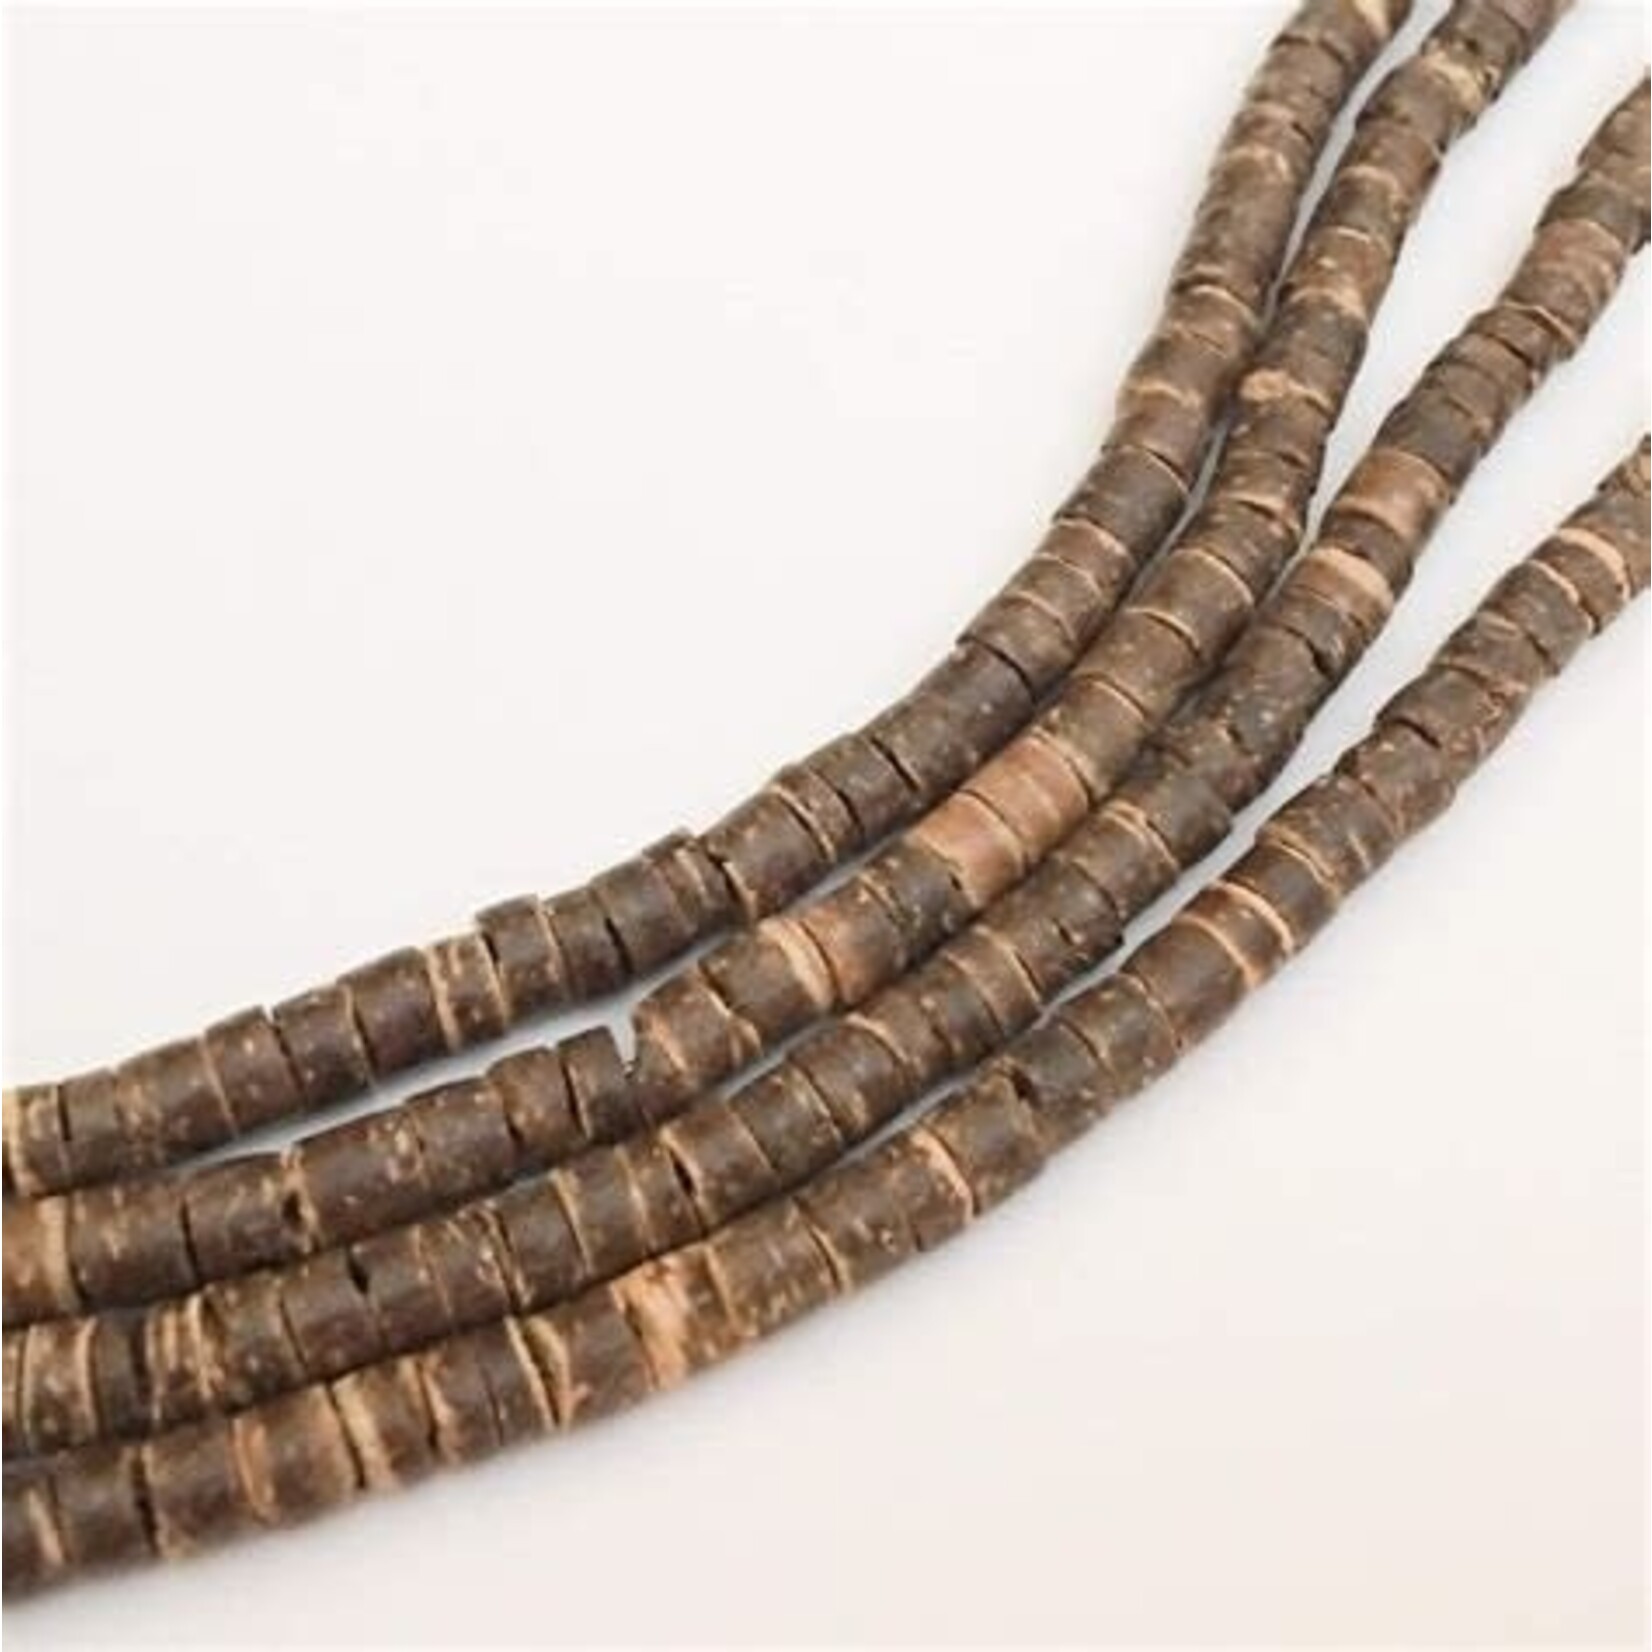 Coco Heishi 4-5mm Natural Beads - 20 Pieces - Bead Inspirations